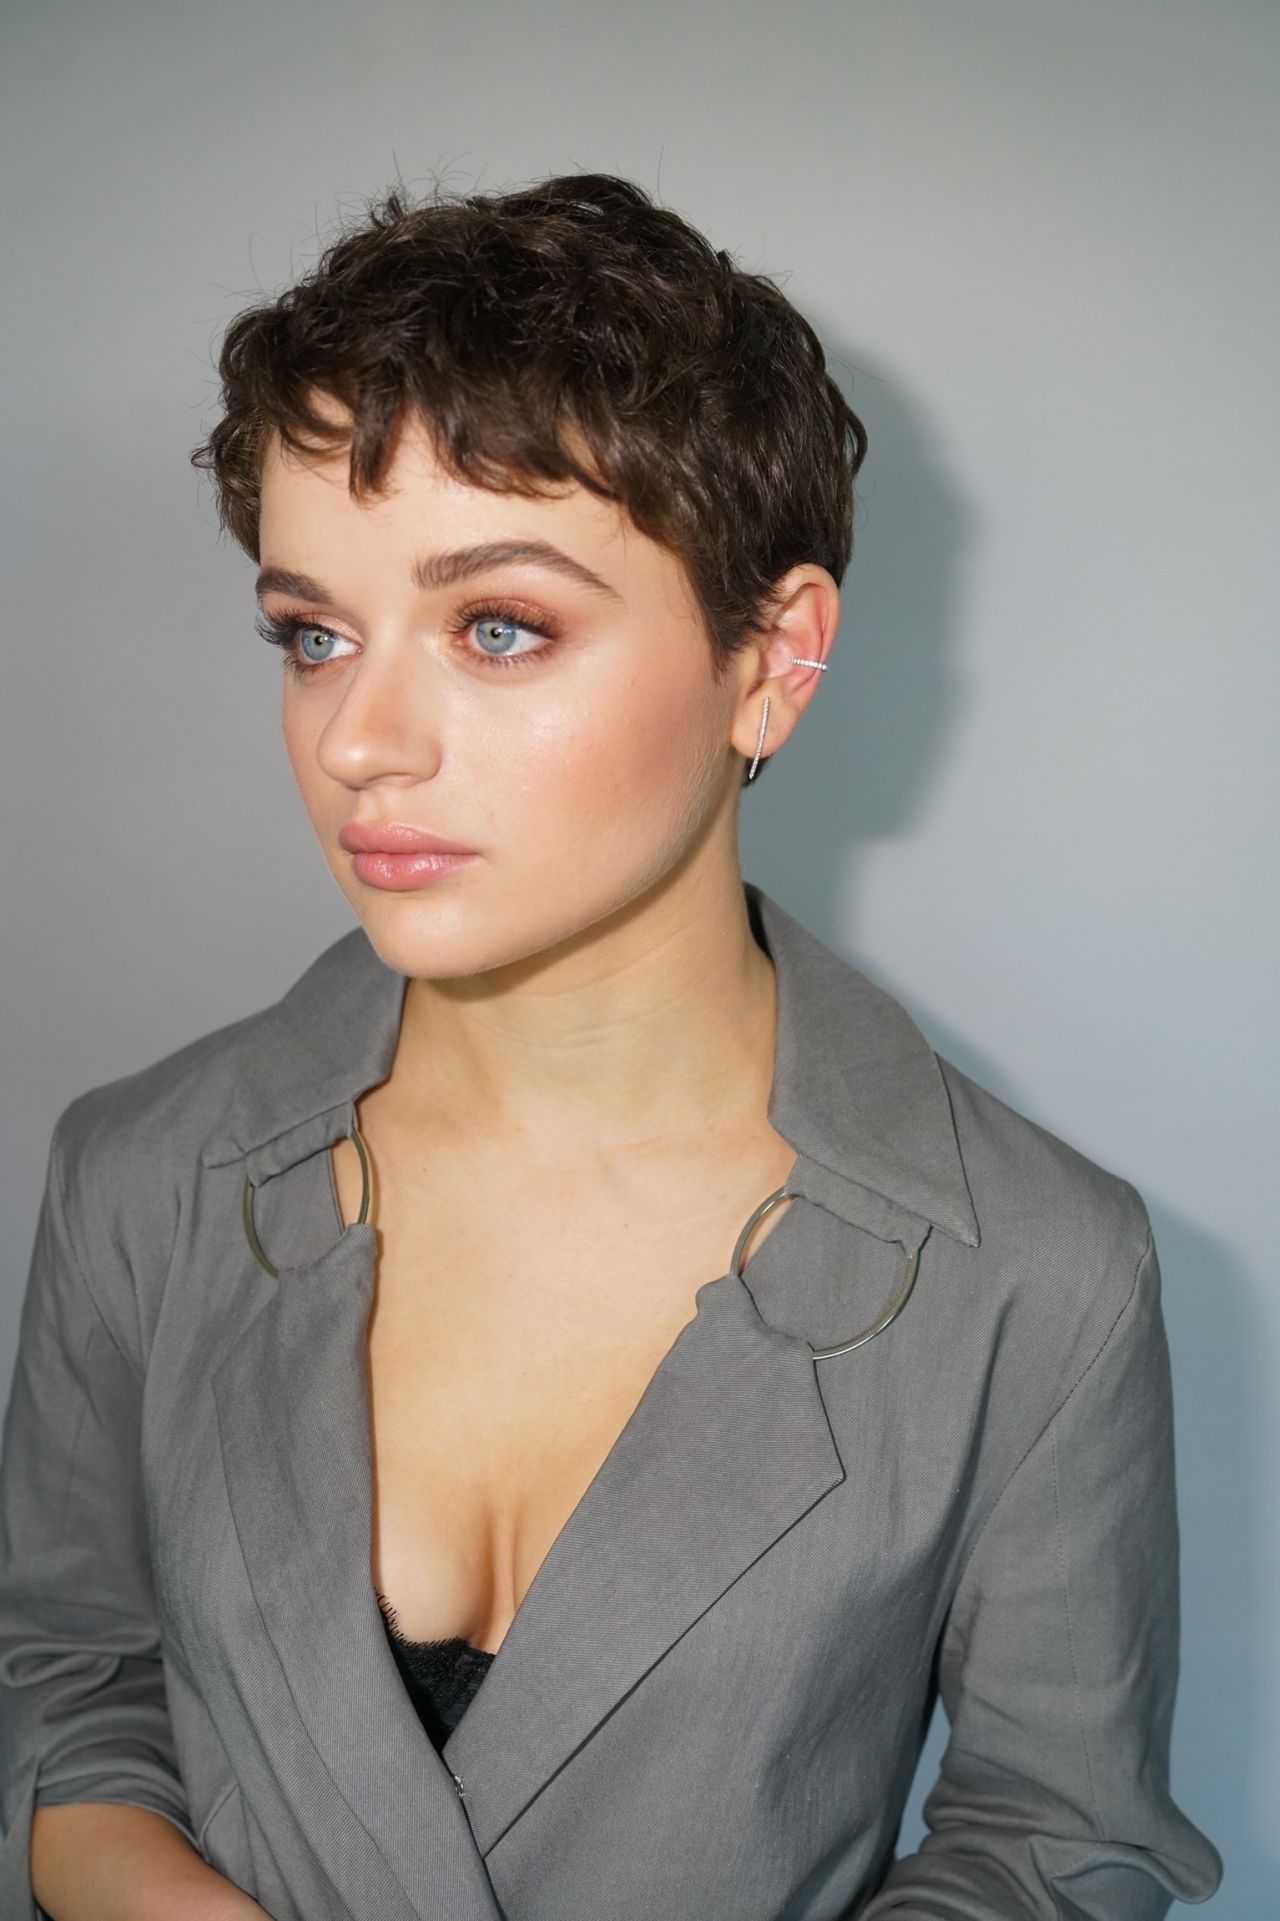 70+ Hot And Sexy Pictures Of Joey King Exposes Her Curvy Body 568